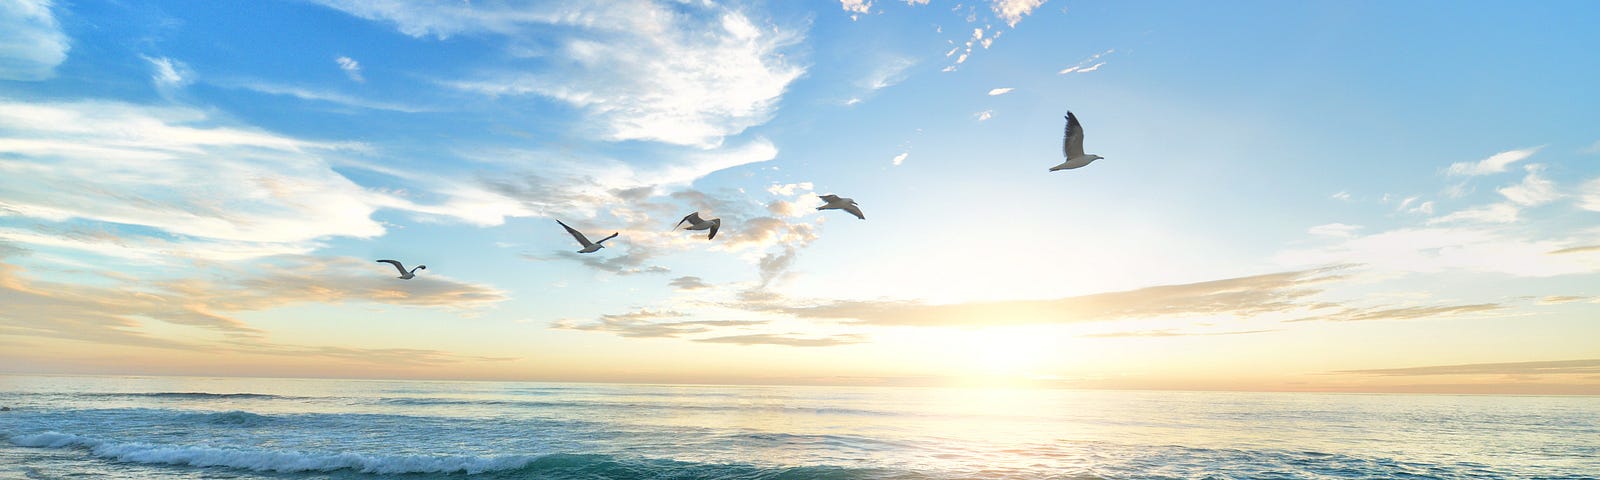 Five seagulls fly over the breaking waves at a beautiful beach. The sun is about to set on the horizon.